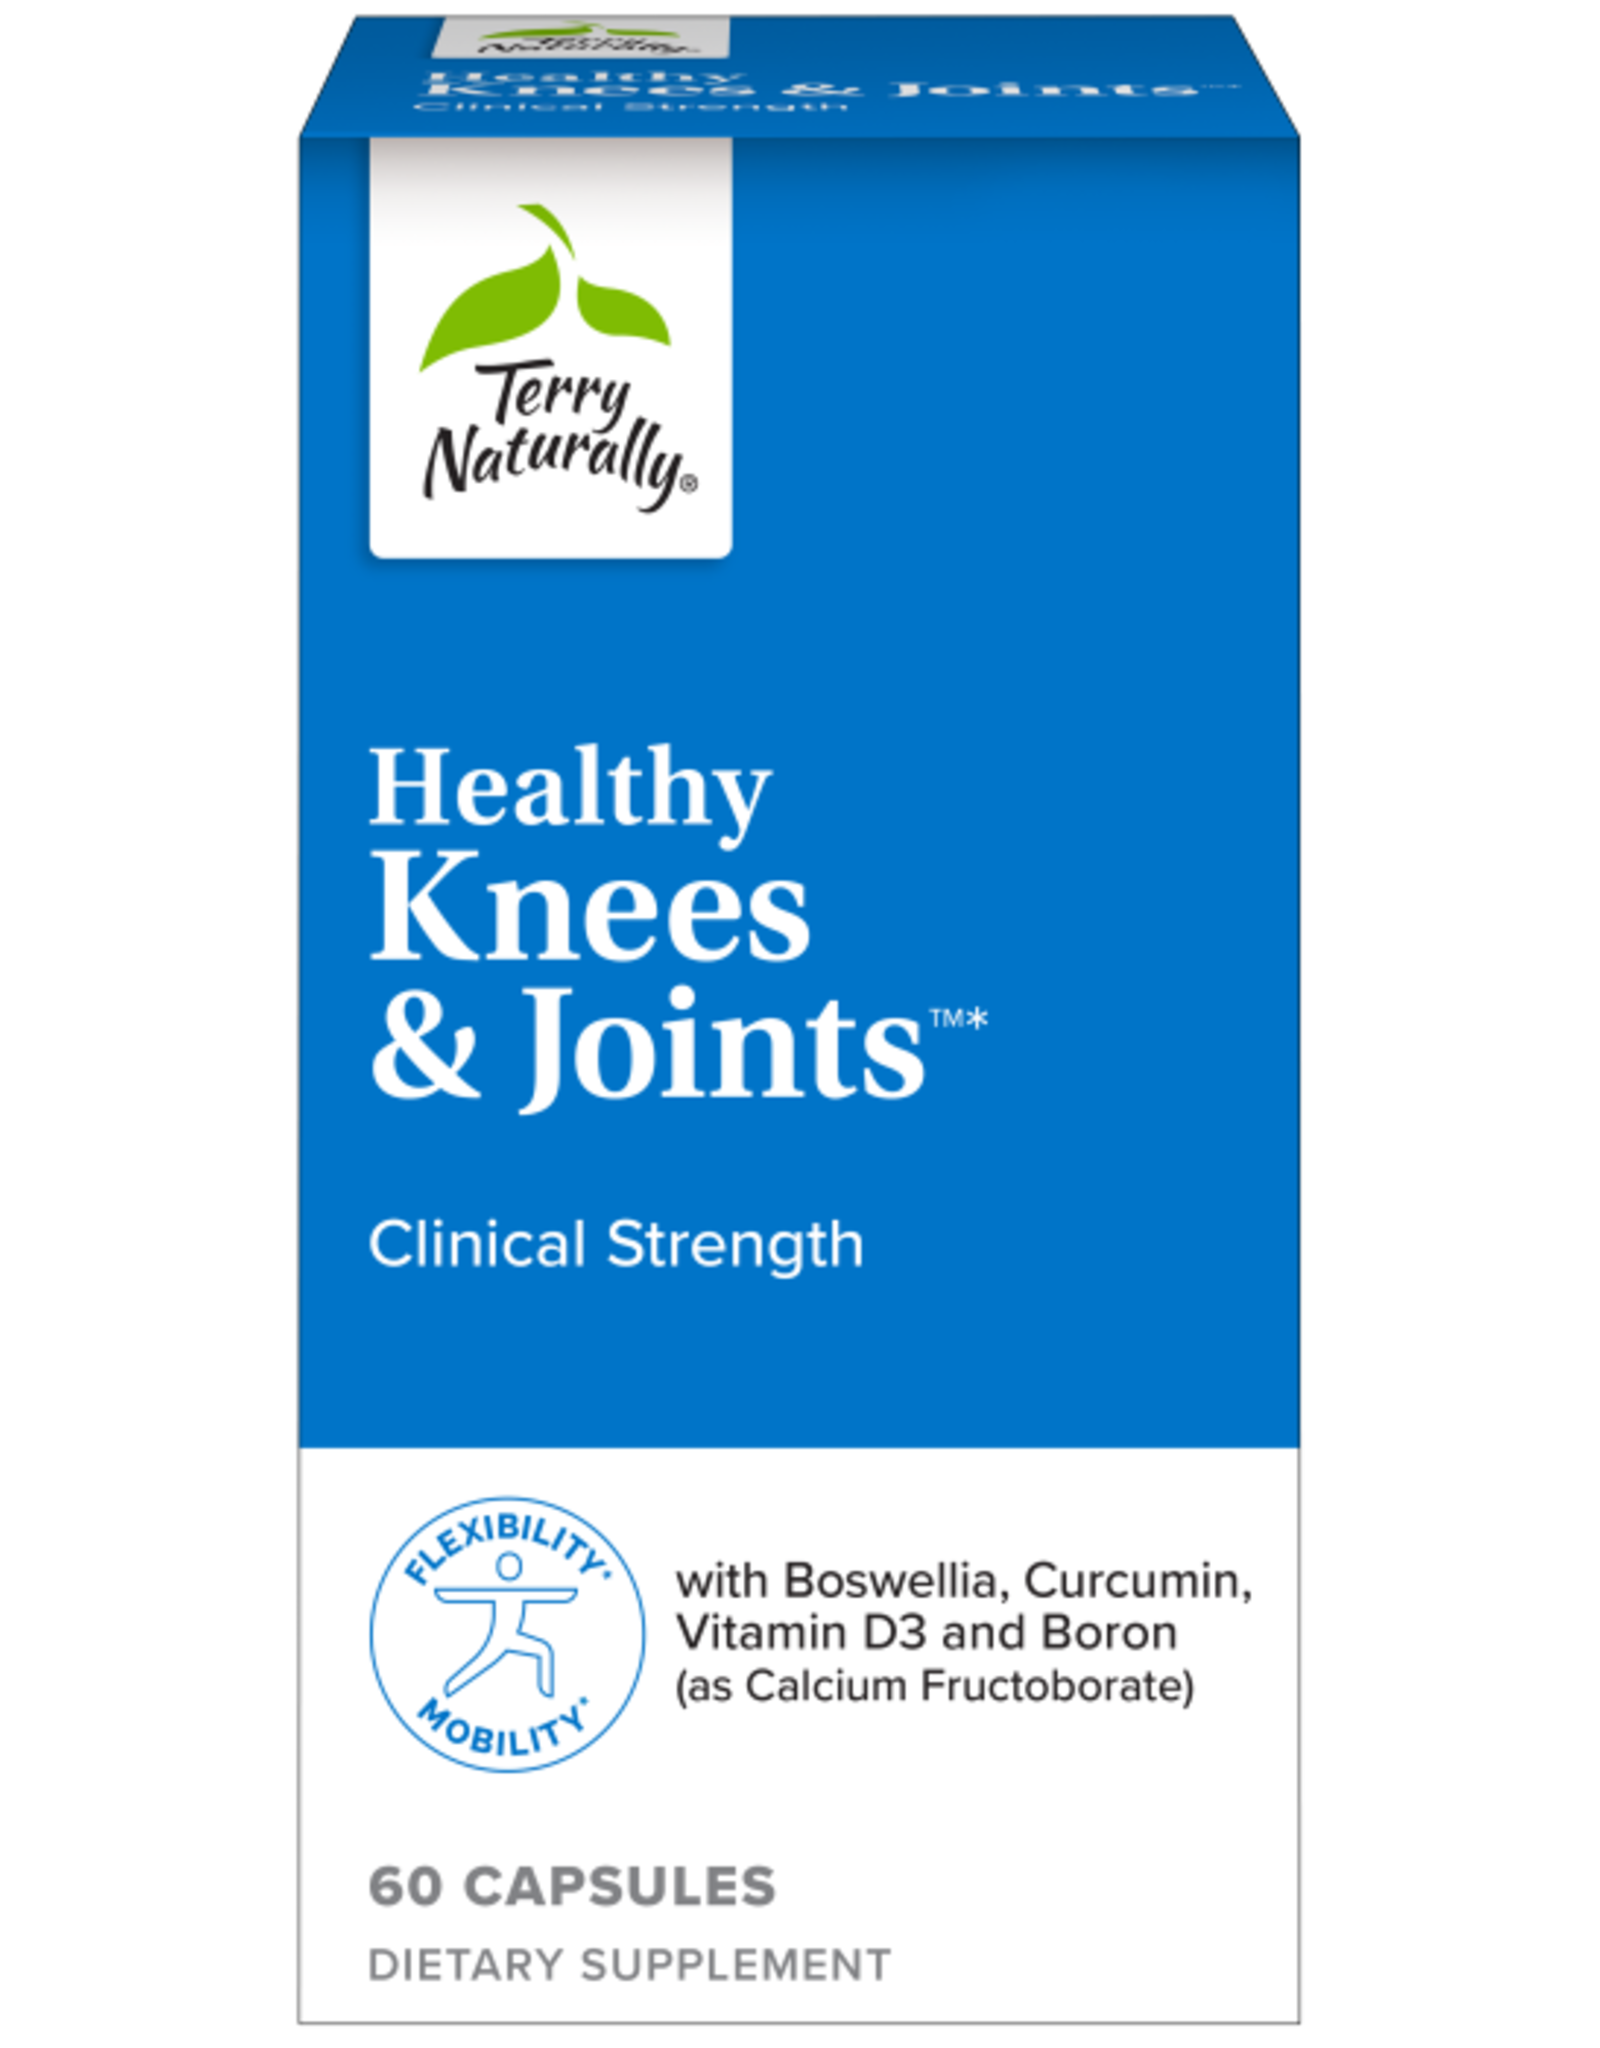 Terry Naturally Healthy Knees & Joints